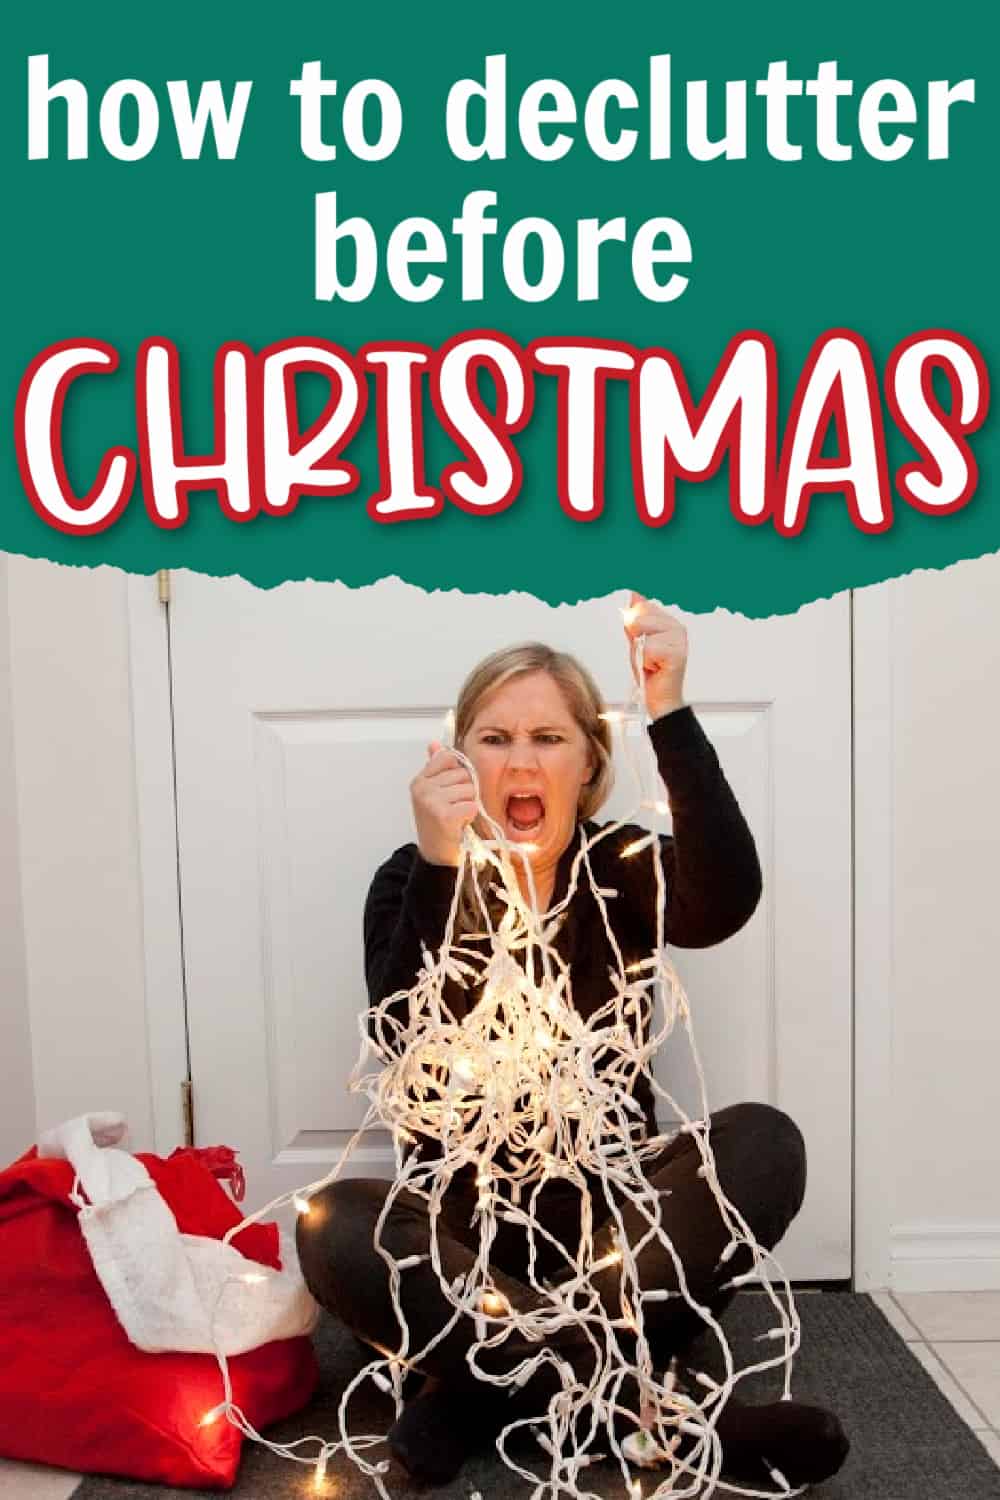 7 Sure-Fire Ways to Declutter for Christmas